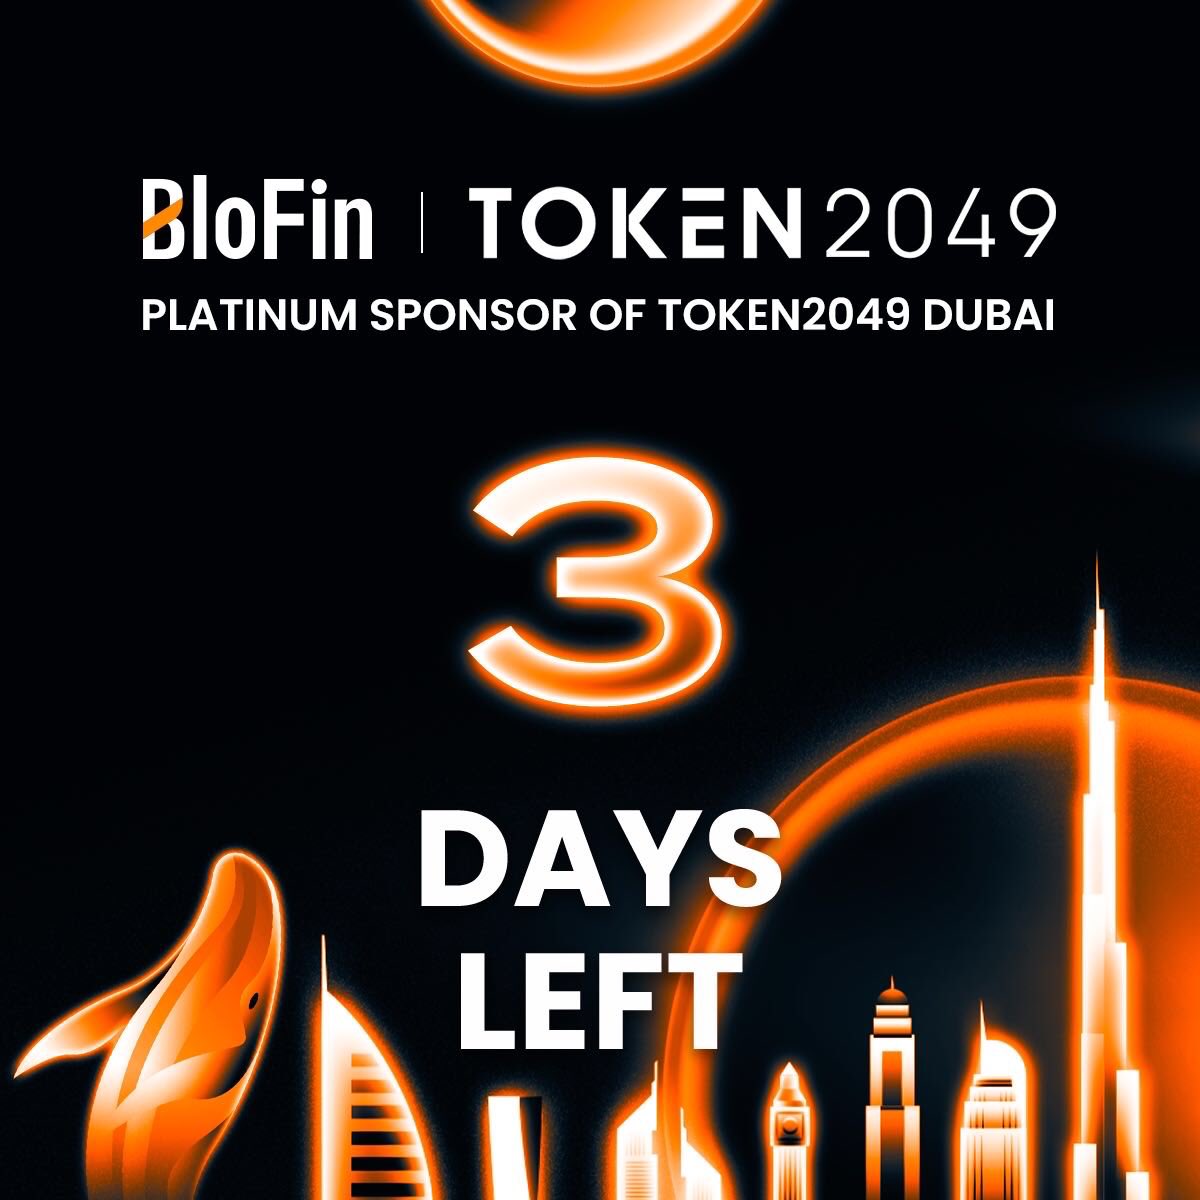 ⏳Just 3 days left until the epic bash at @token2049's WhalesNight AfterParty by @BloFin_official ! 🐋 Get ready to soar high with industry giants, influencers, and VIPs. 🔗More details: lu.ma/BloFinWhalesNi… 🌊Let's make waves together! #BloFin #token2049dubai #Bitcoin